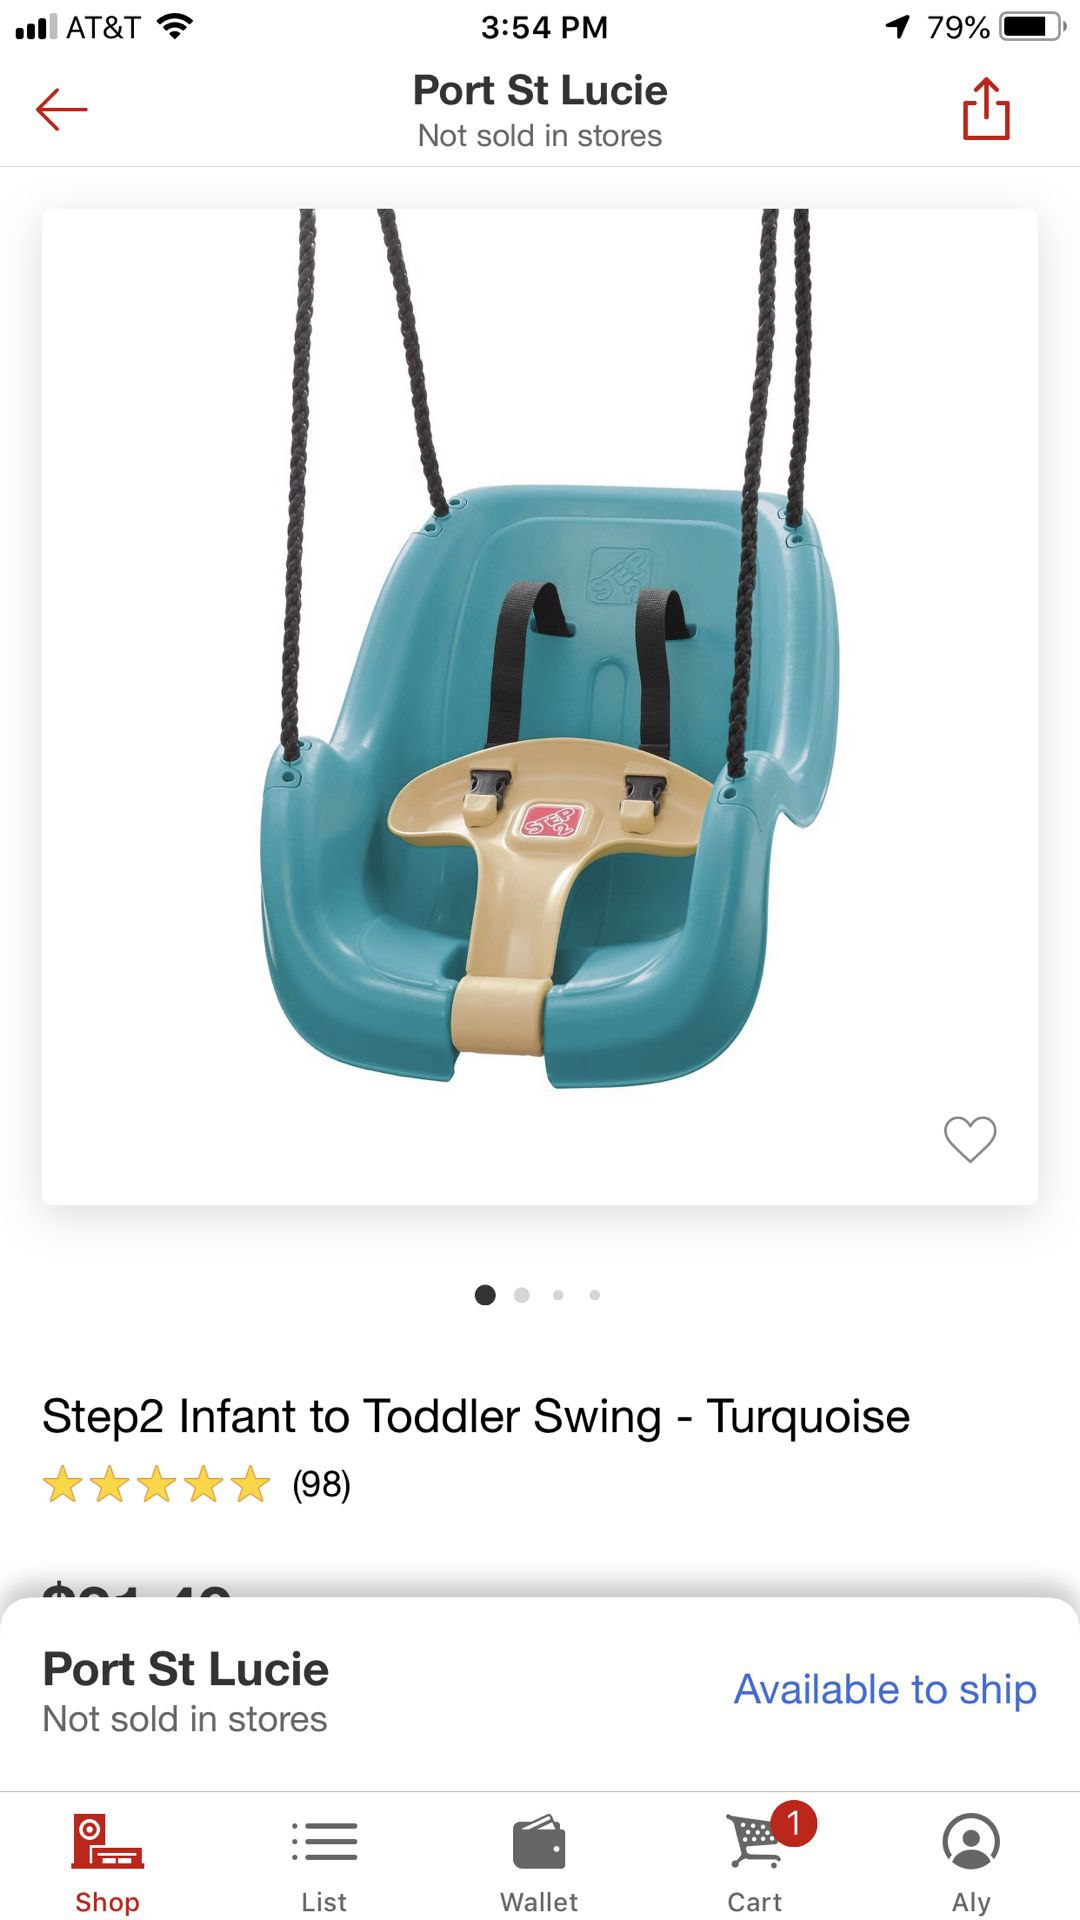 Step 2 infant to toddler swing